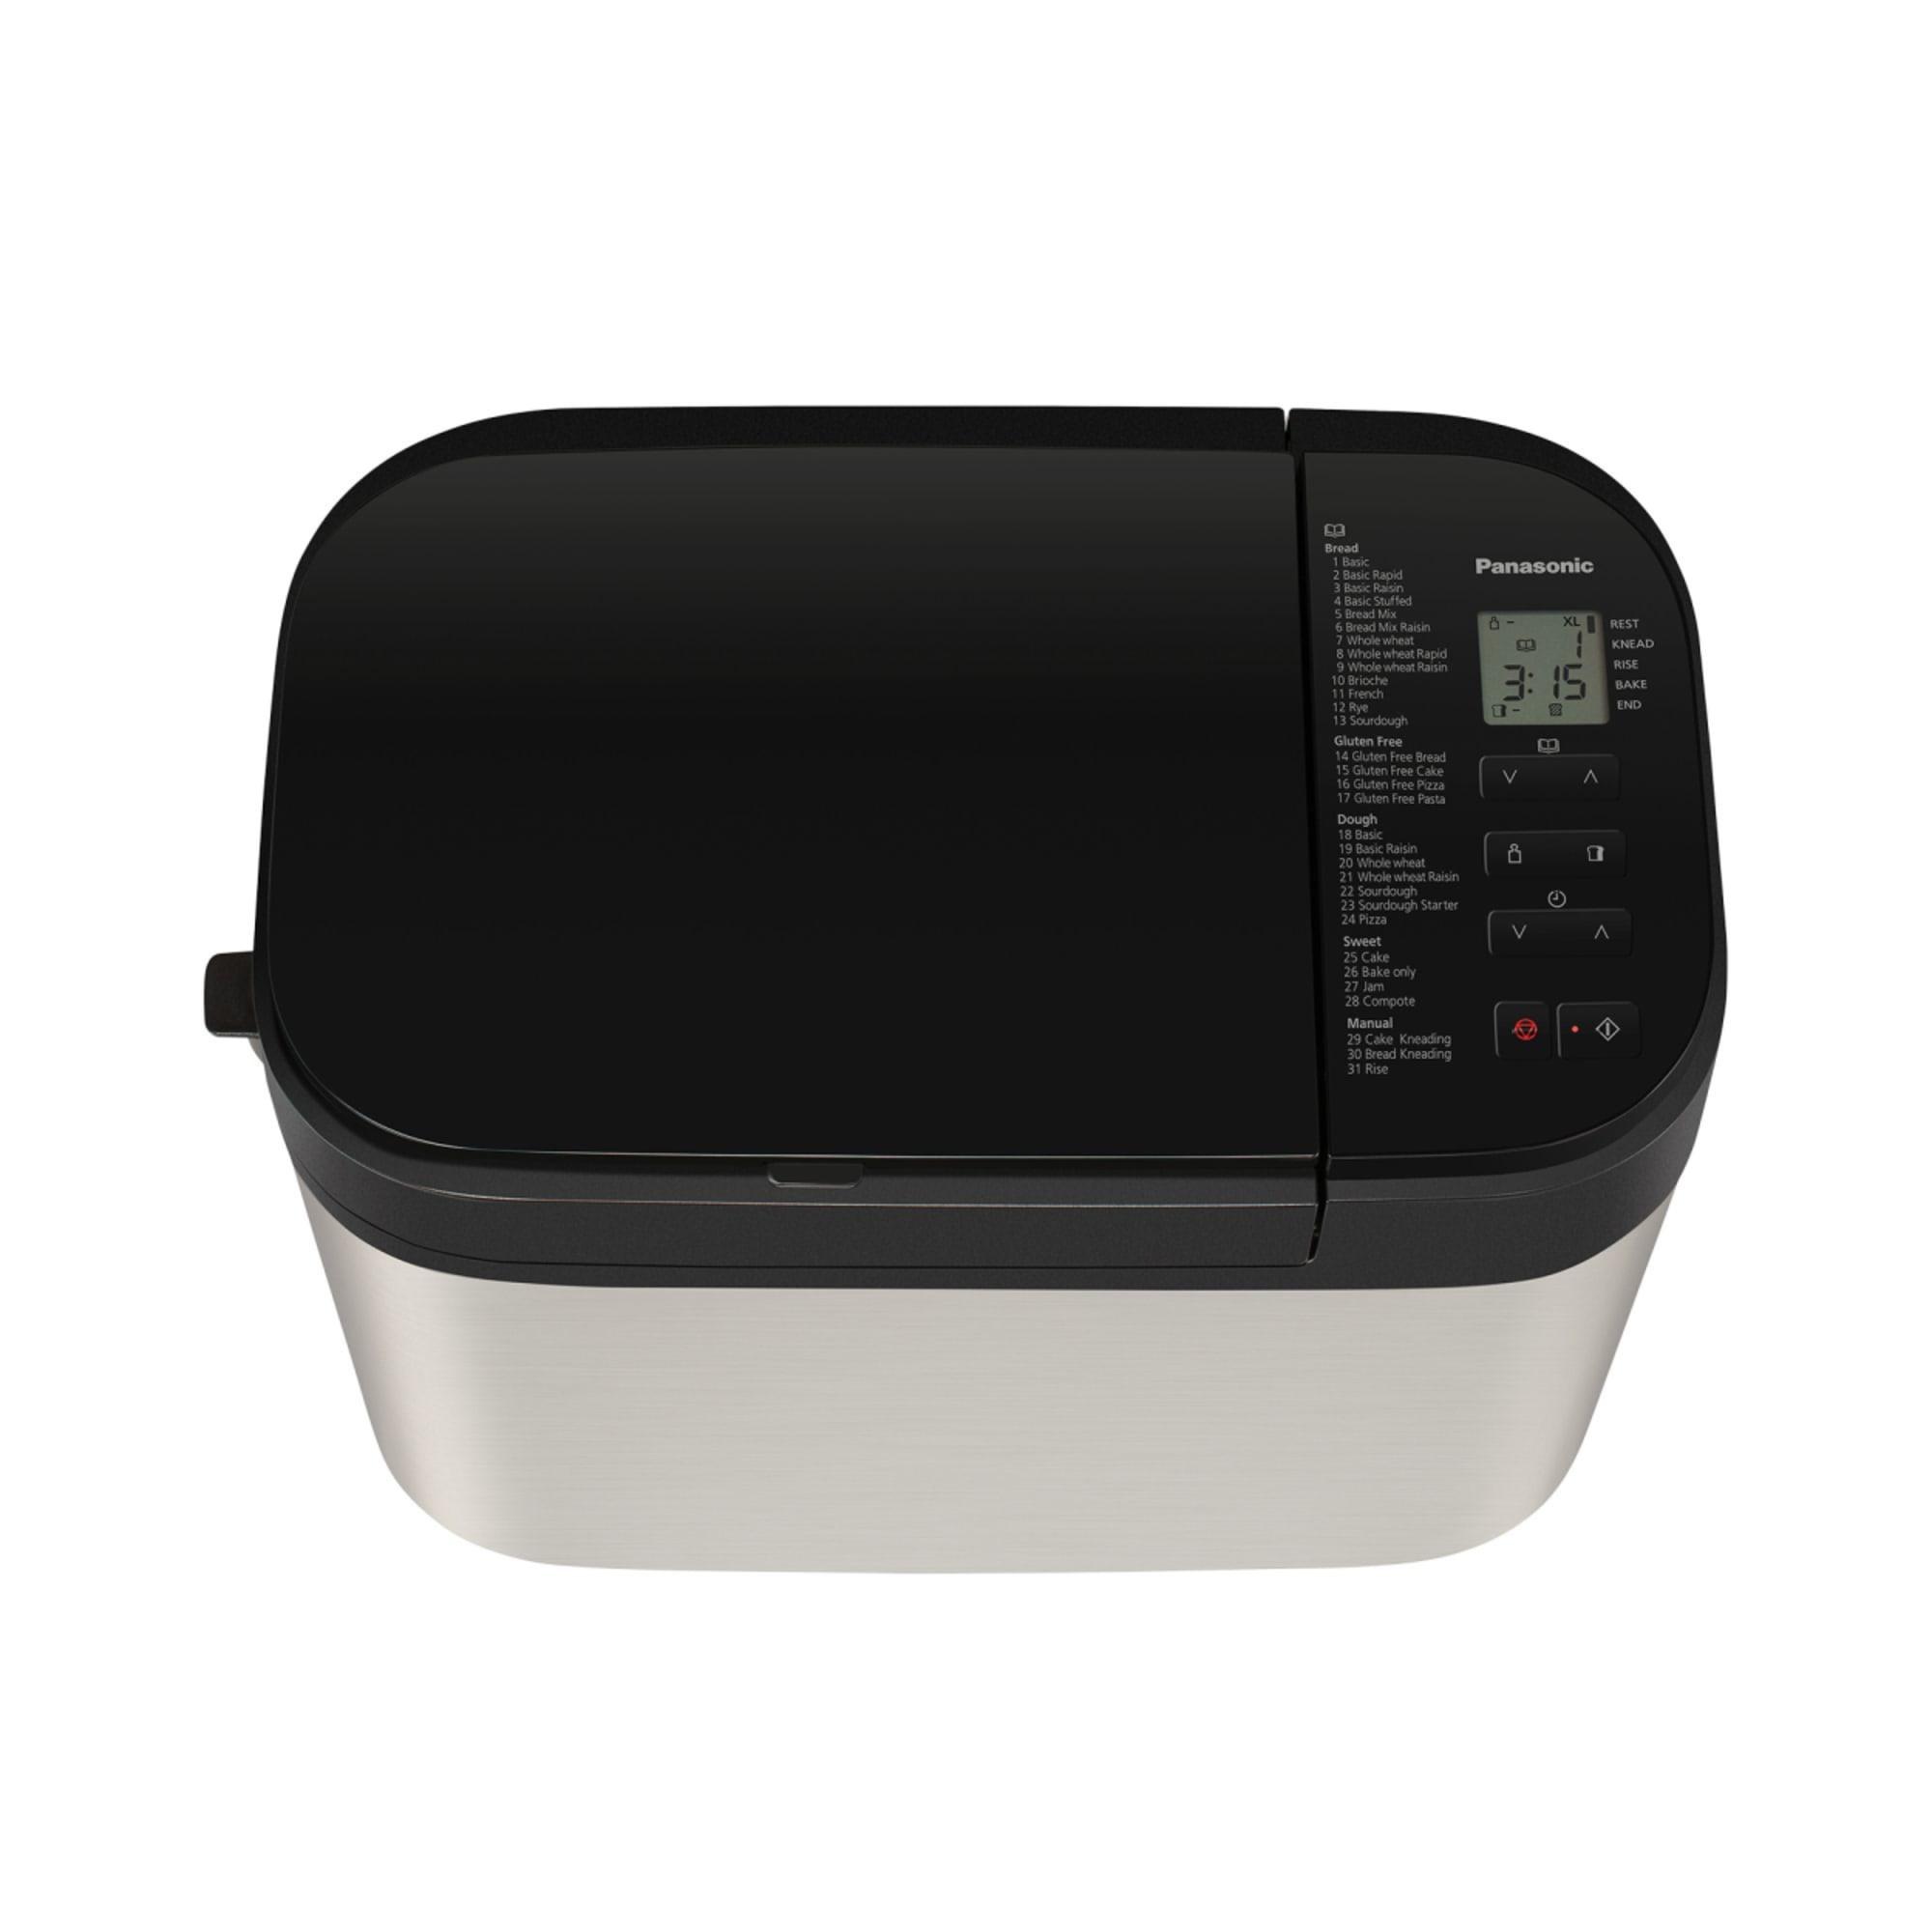 Panasonic Bread Maker with Dual Dispenser Stainless Steel Image 9